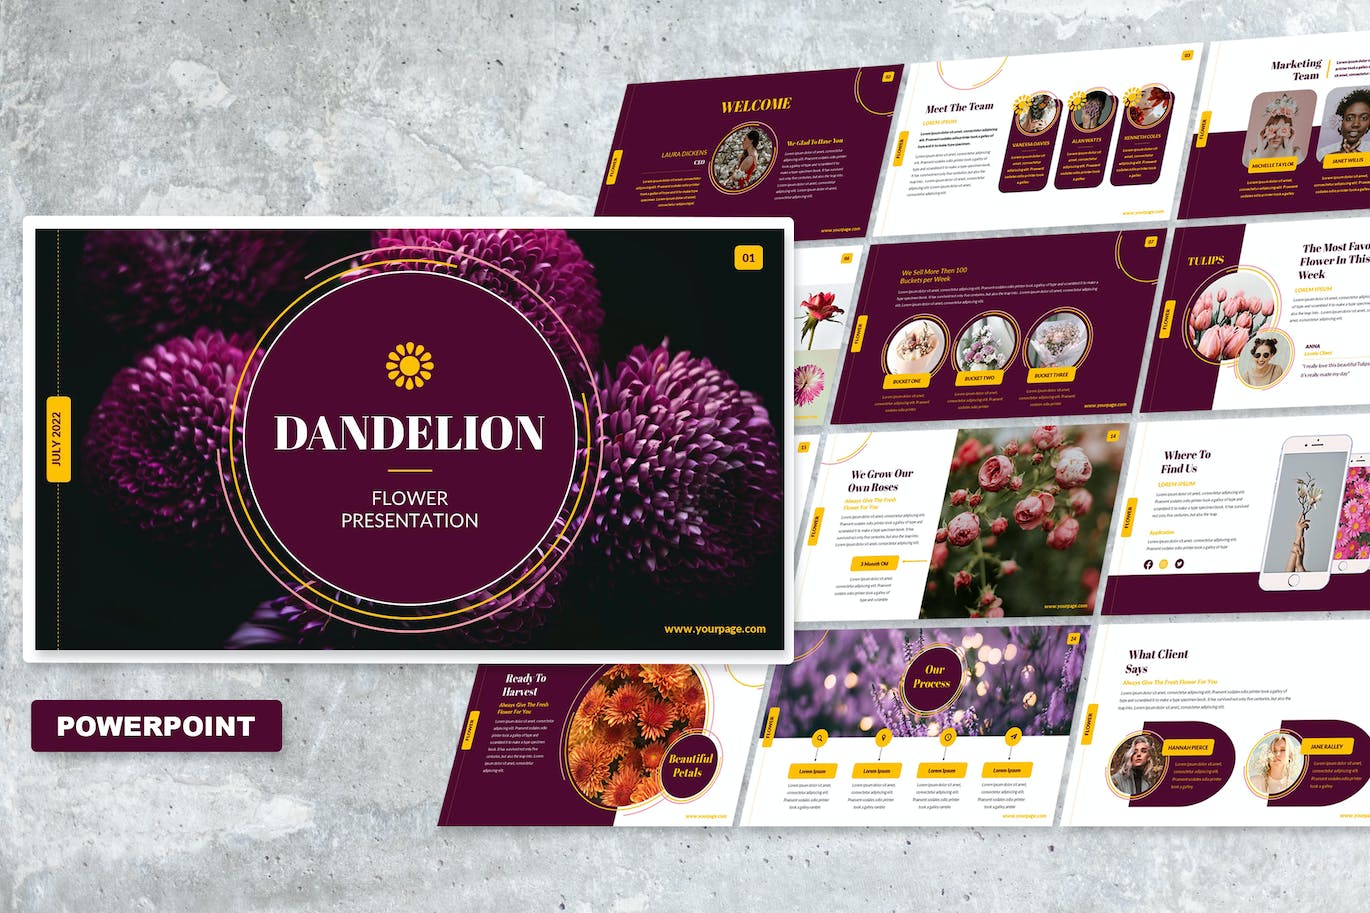 Collection of images of beautiful presentation template slides on the theme of flowers.